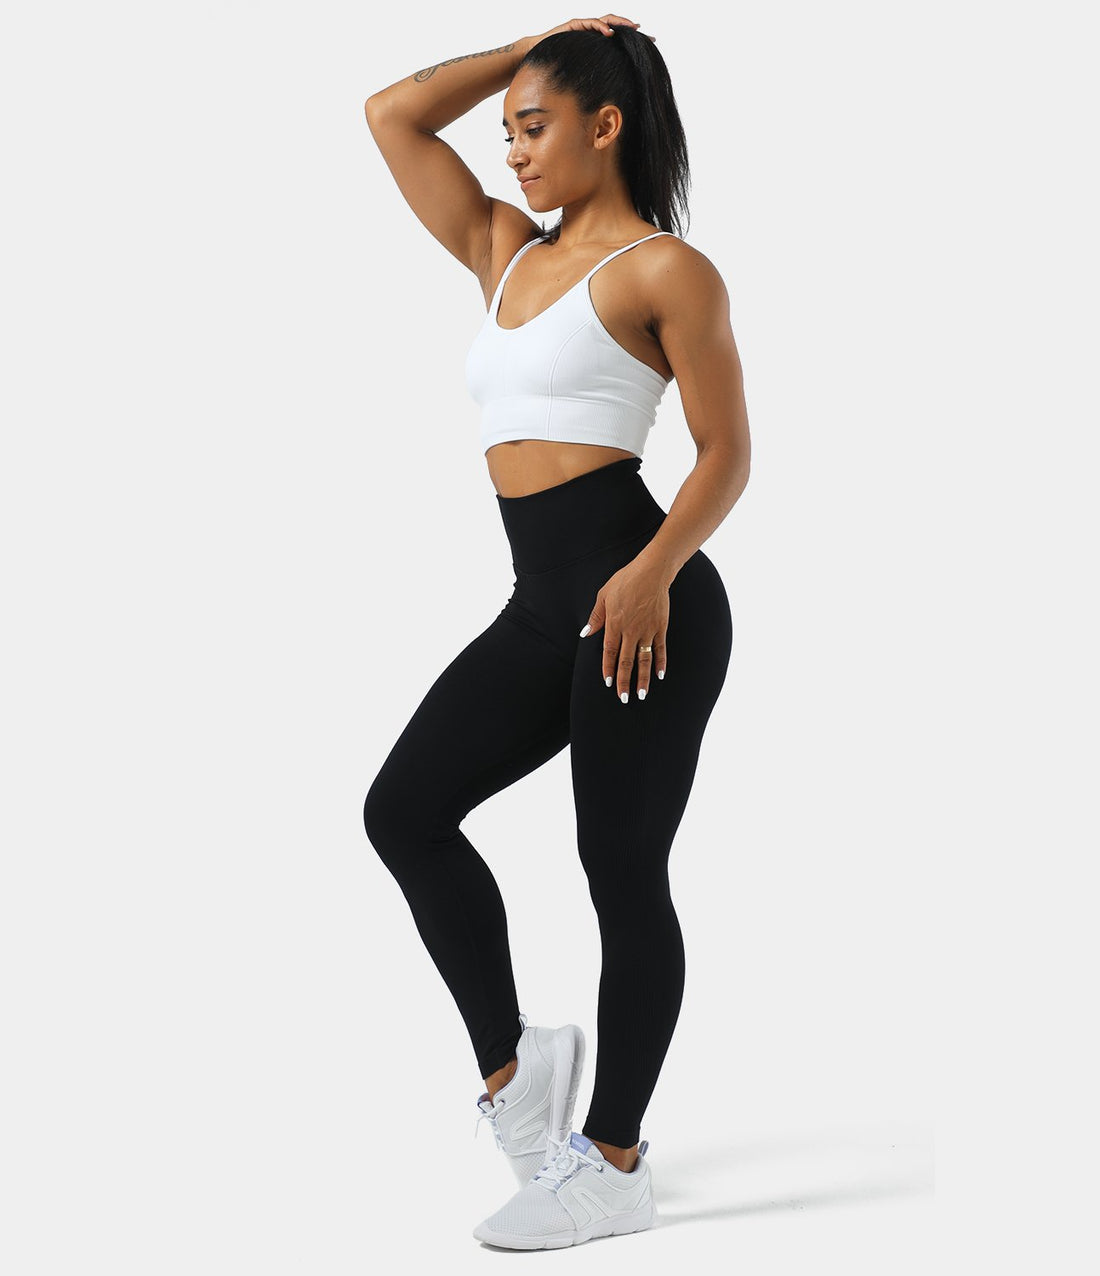 We've discovered the Ultimate Squat proof leggings once again